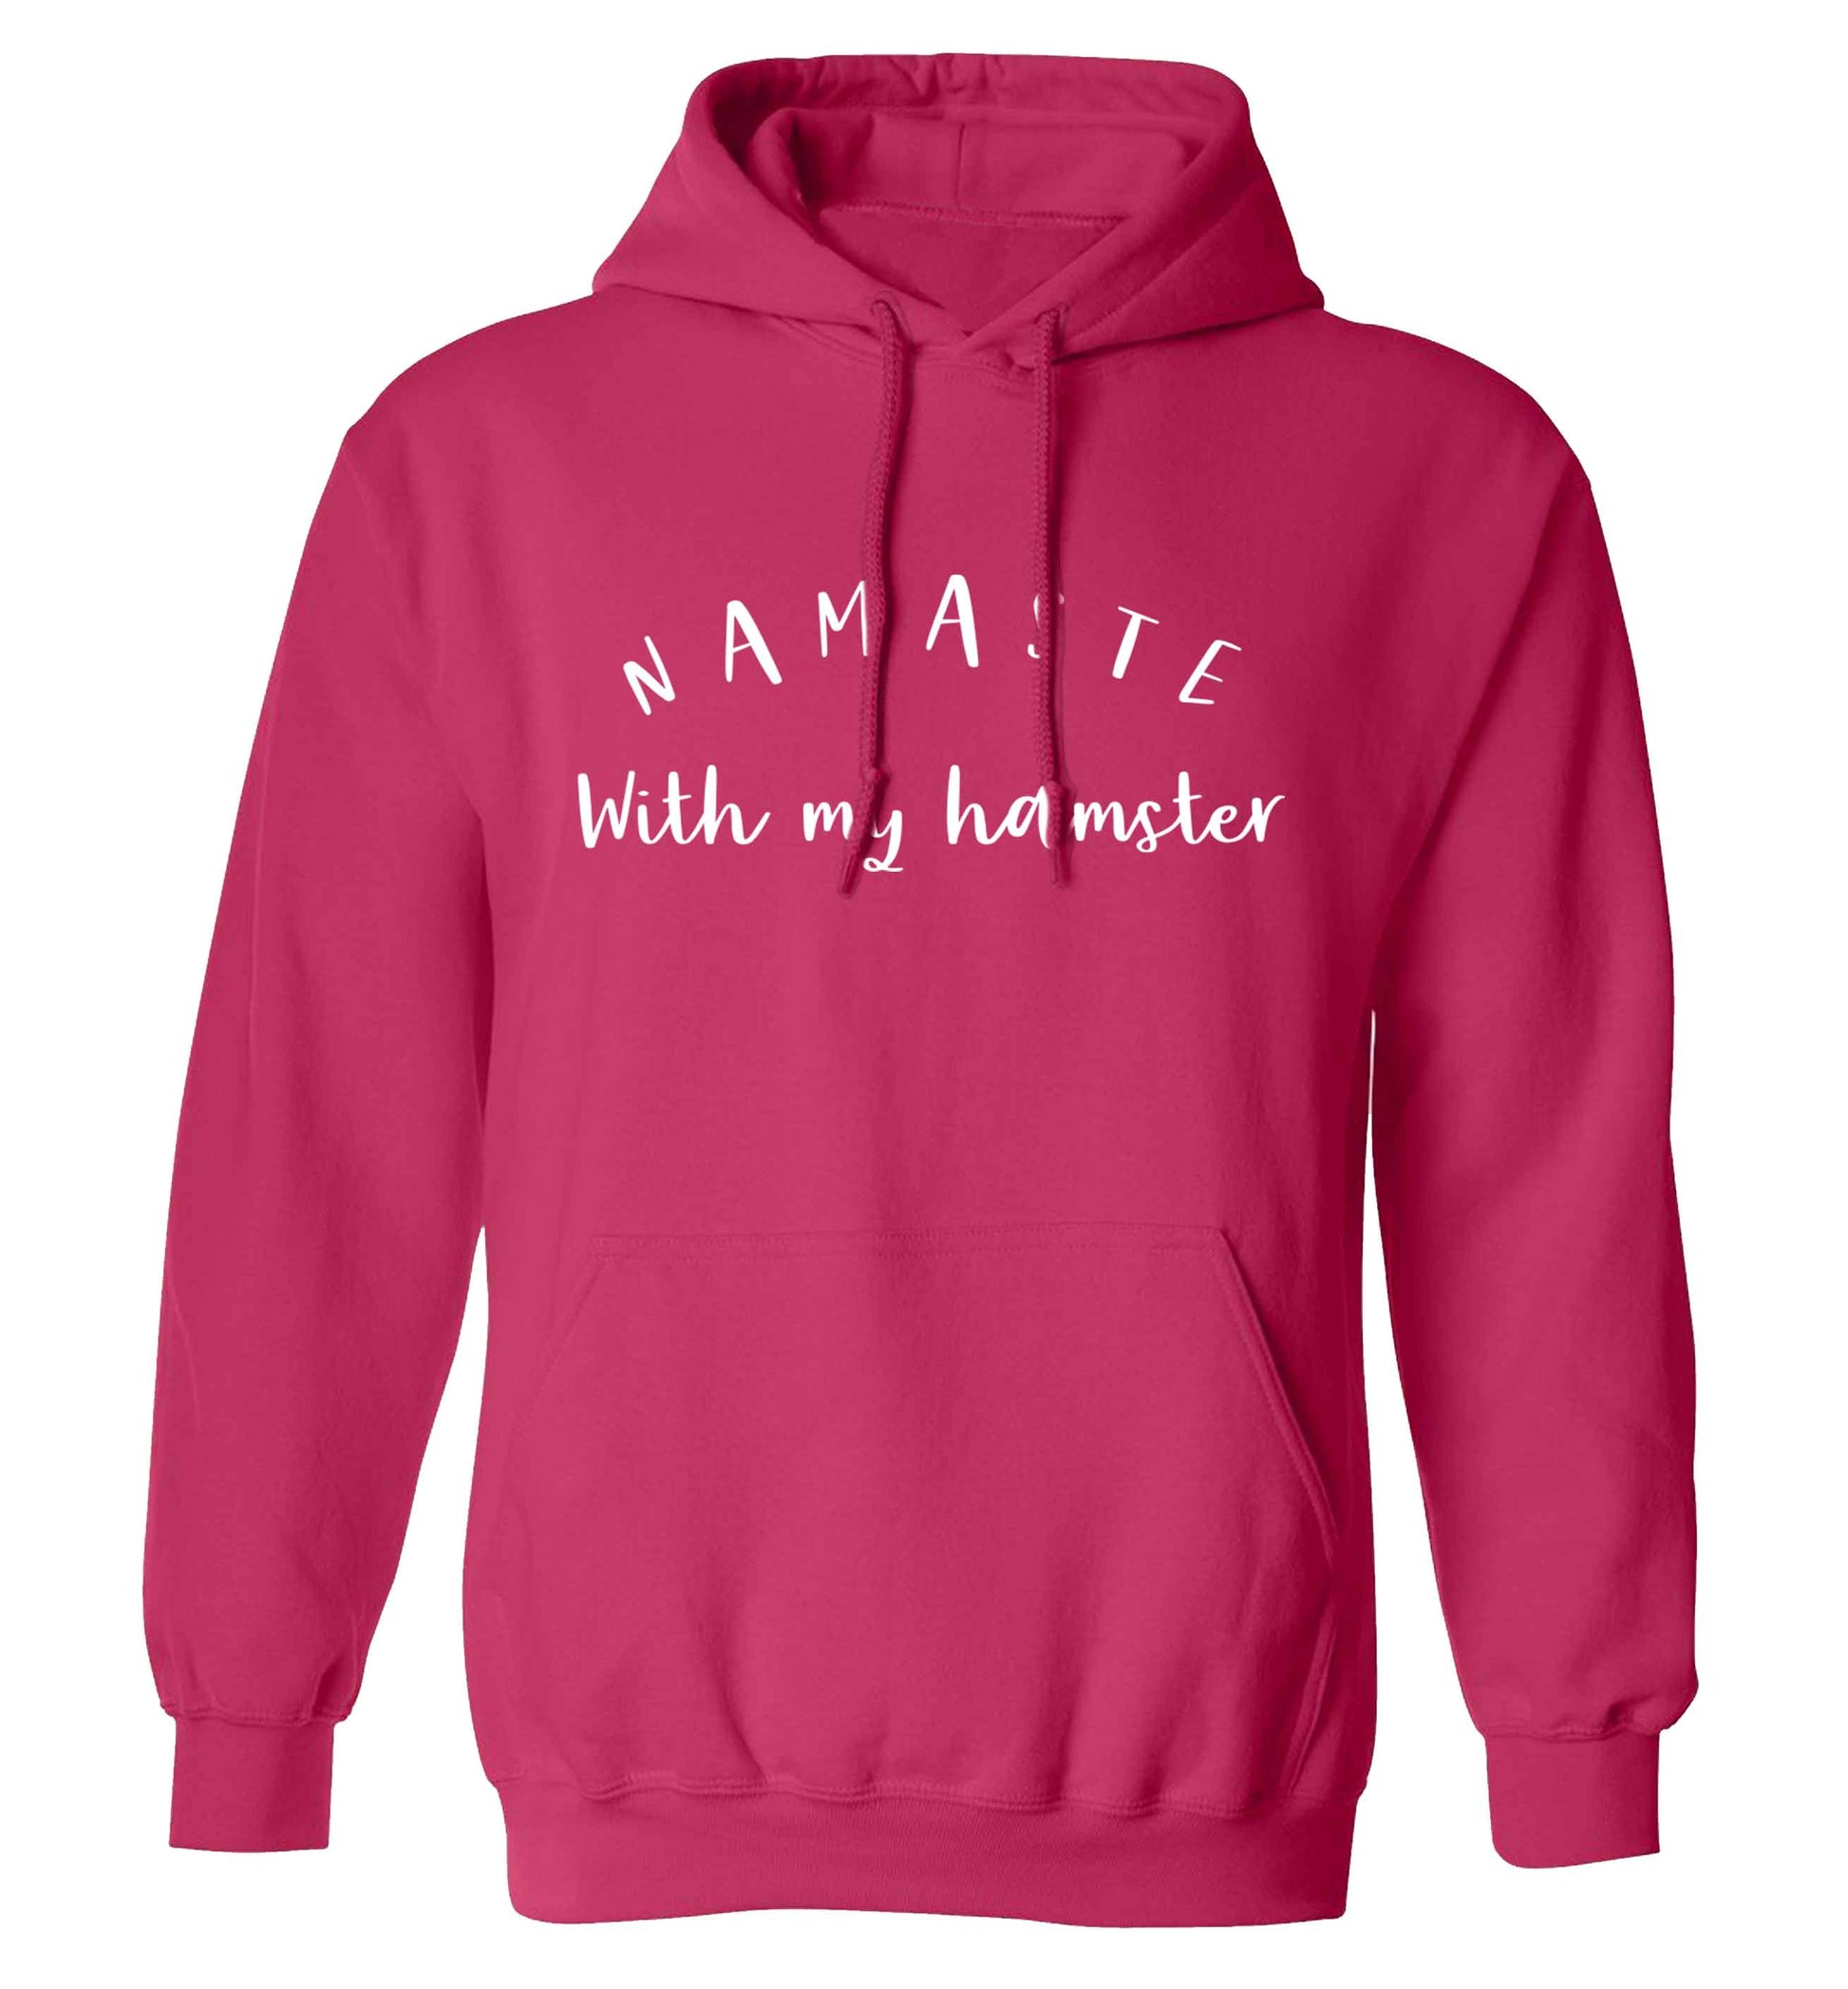 Namaste with my hamster adults unisex pink hoodie 2XL